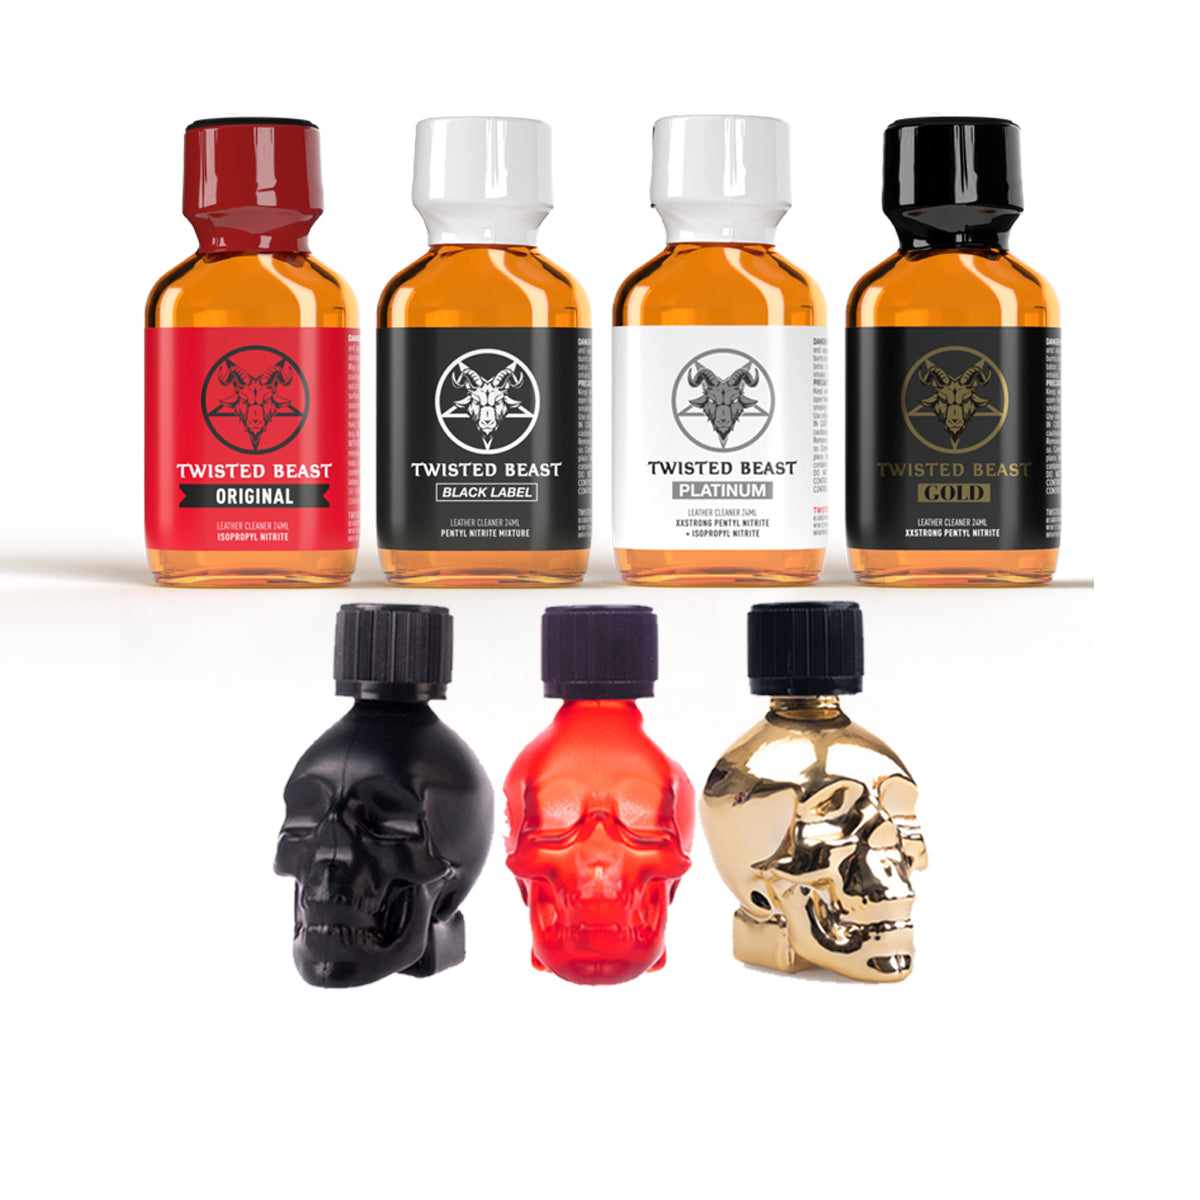 TWISTED BEAST CLASSICS, POPPERS UK, POPPERS USA, FREE DELIVERY, NEXT DAY DELIVERY